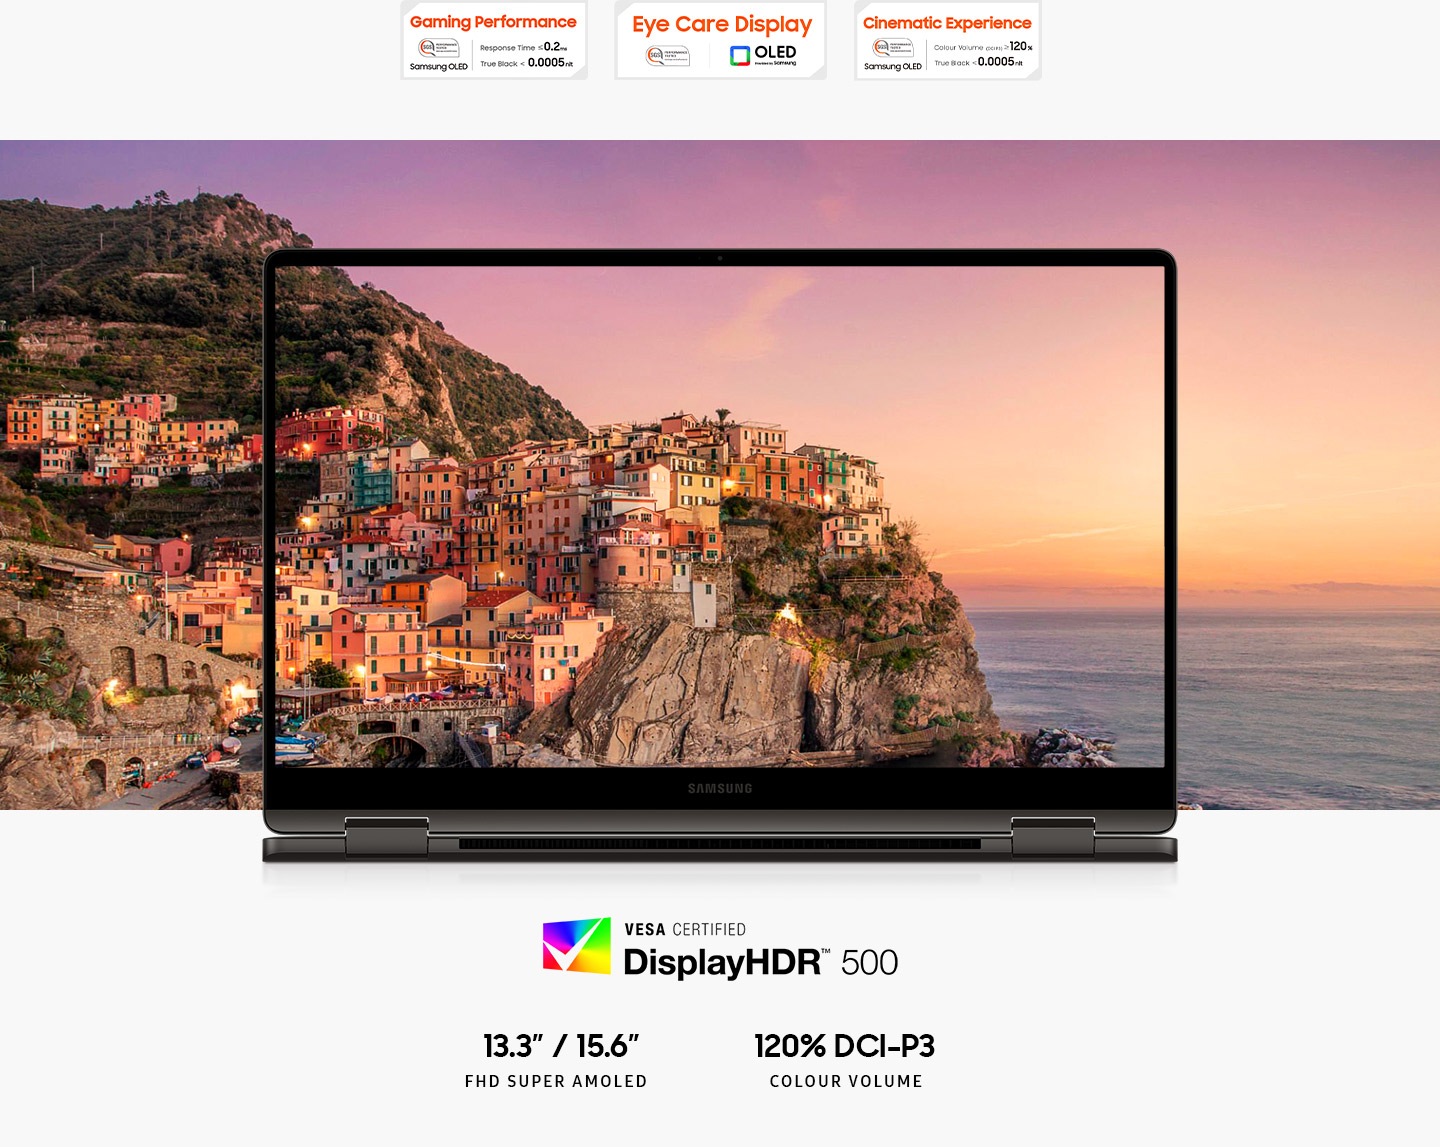 A colorful landscape of a town by the sea at sunset is shown on the screen of Galaxy Book3 360 with the picture extending outside the screen in all directions. Above are two SGS certifications. The Gaming Performance certification has the text Response Time less than or equal to 0.2ms, True Black less than 0.0005nit. SGS Performance tested Samsung OLED. The Cinematic Experience certification has the text Color Volume (DCI-P3) greater than or equal to 120%", True Black less than 0.0005nit. SGS Performance tested Samsung OLED. 13.3""/15.6"" FHD SUPER AMOLED. 120%" DCI-P3 COLOR VOLUME.